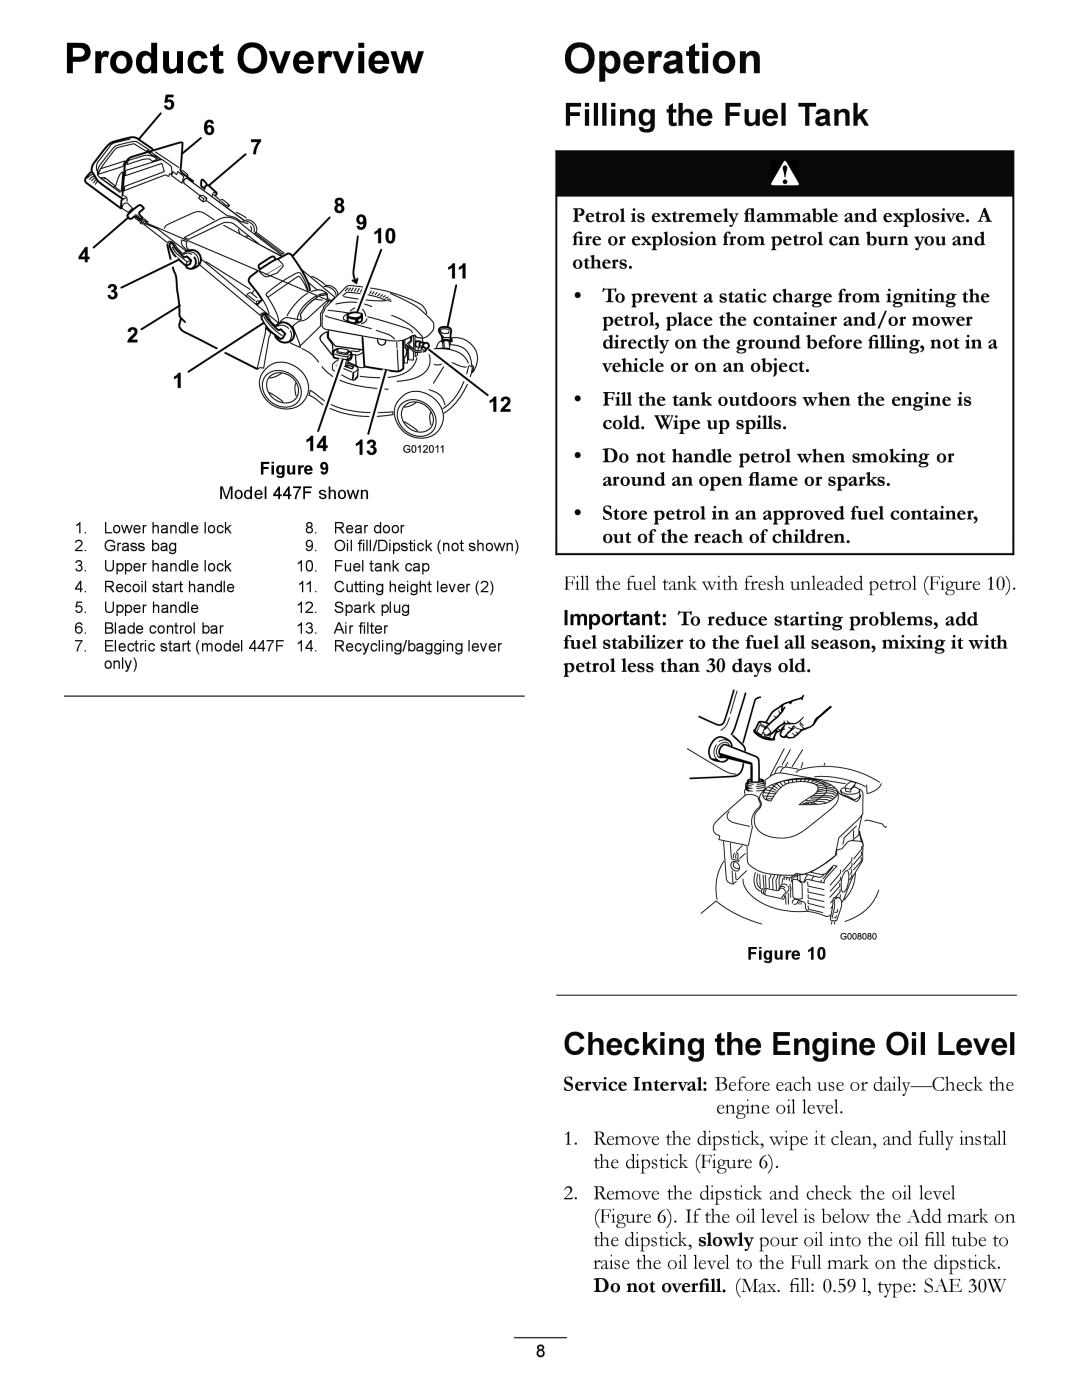 Hayter Mowers 447F manual Product Overview, Operation, Filling the Fuel Tank, Checking the Engine Oil Level 